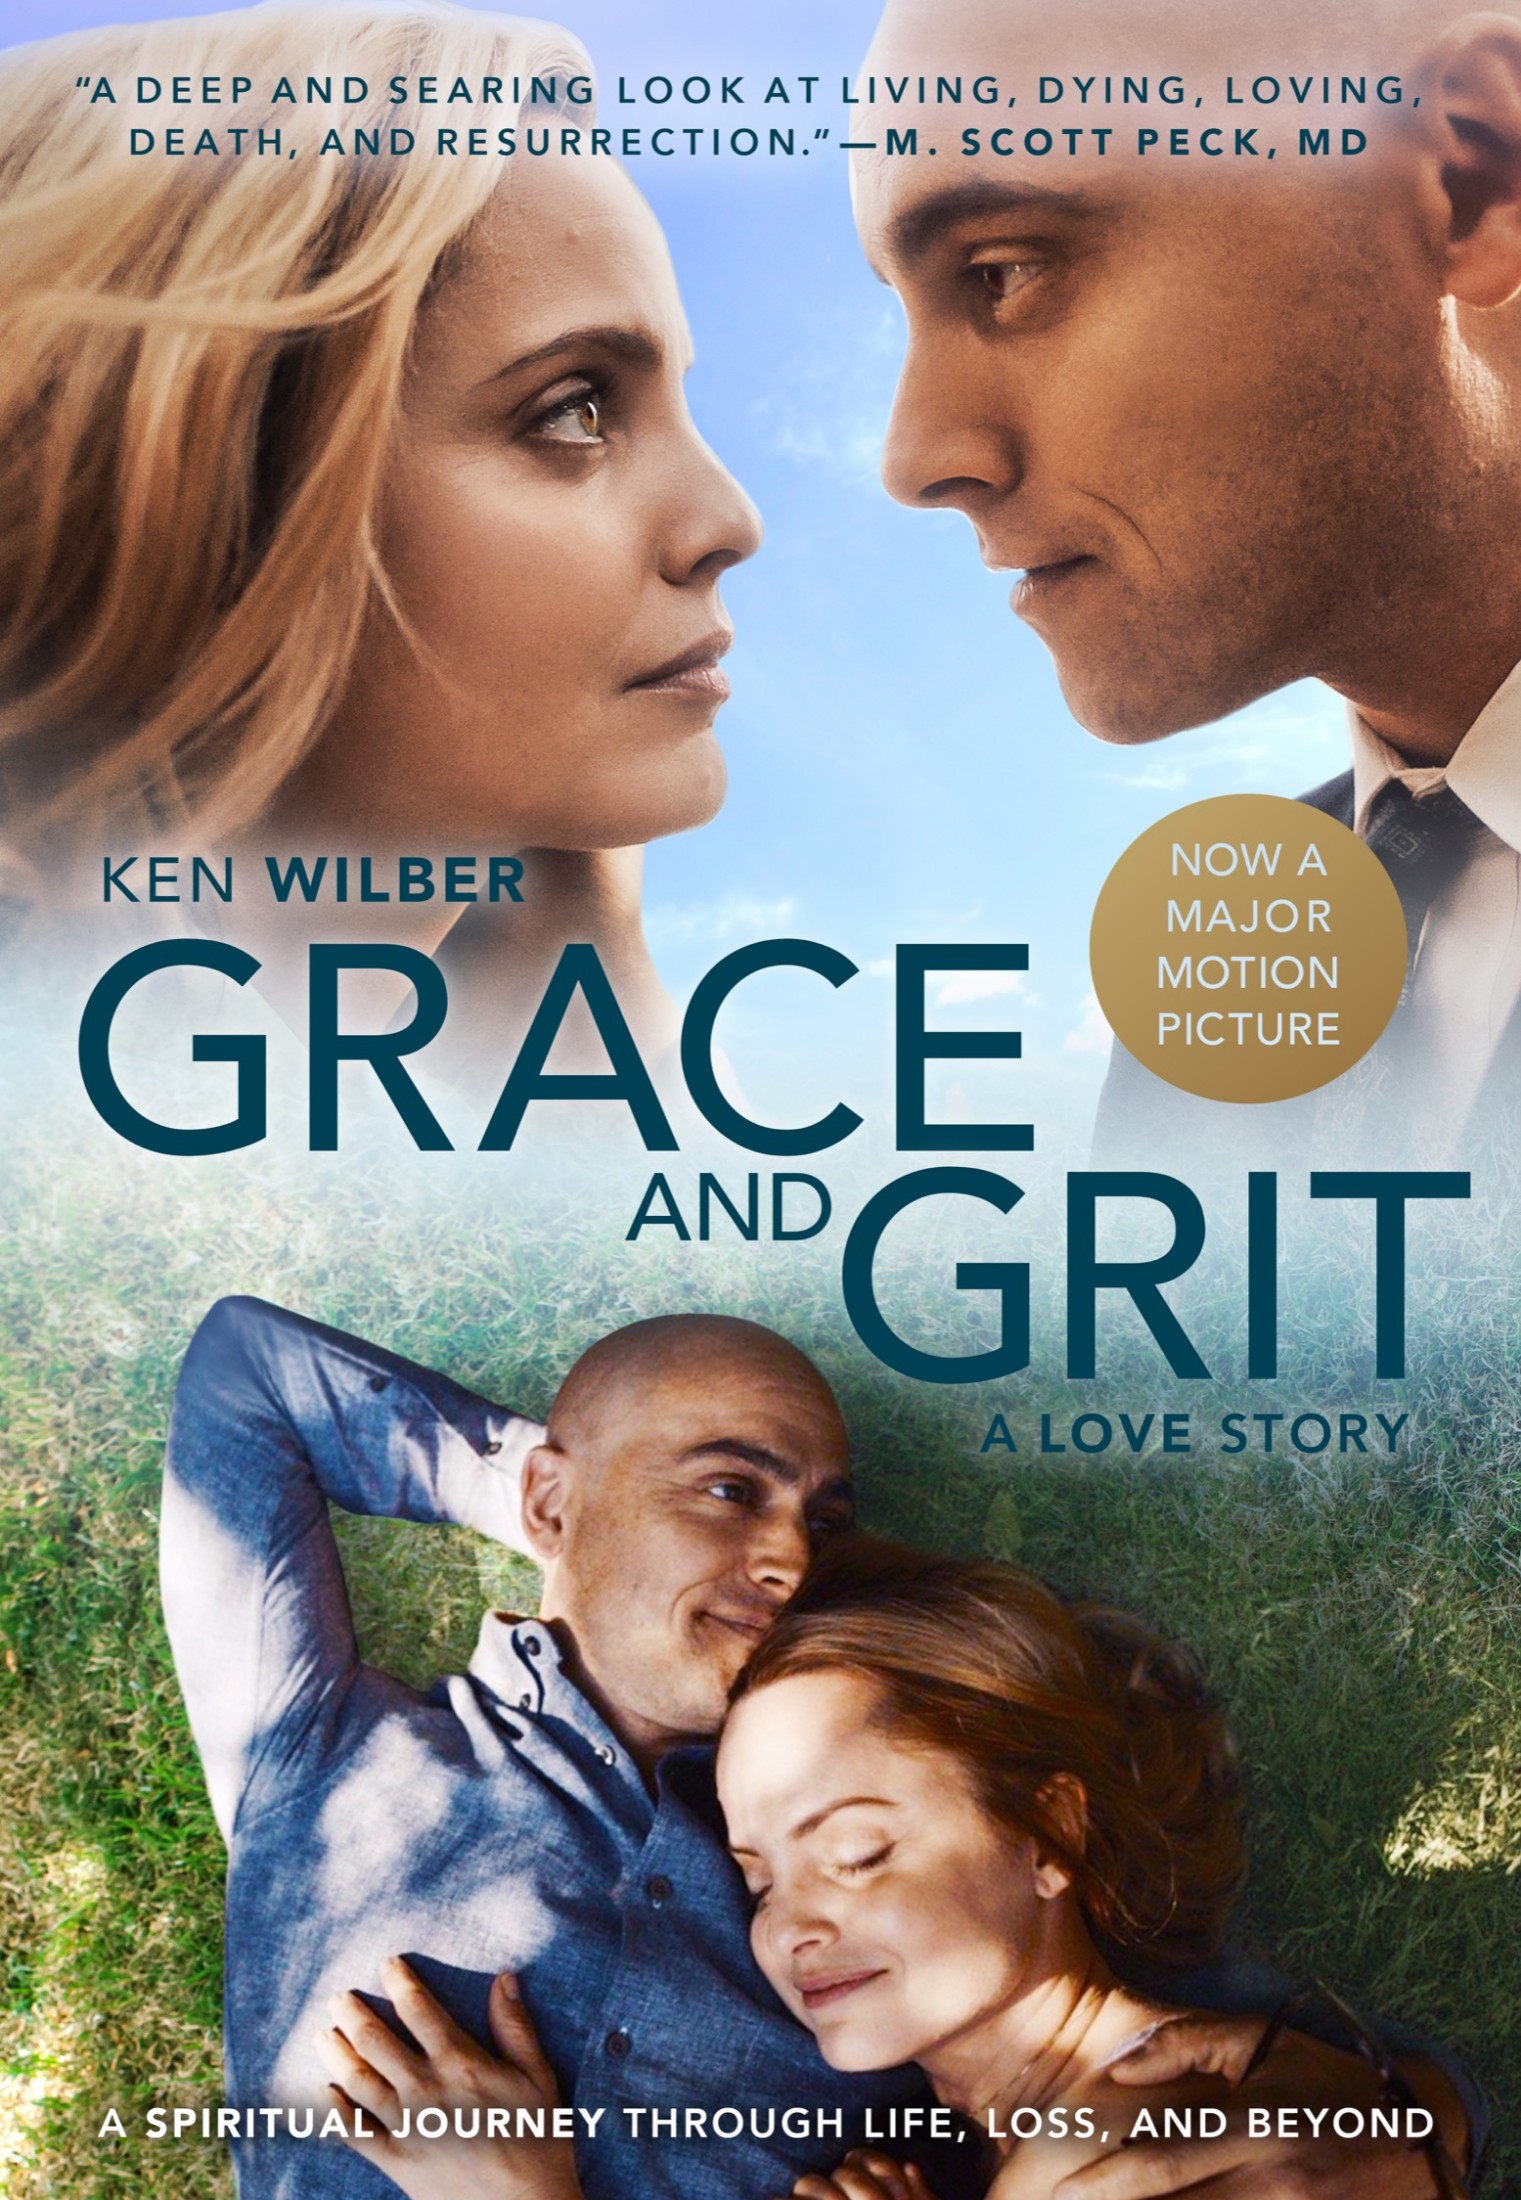 Grace and Grit: A Love Story